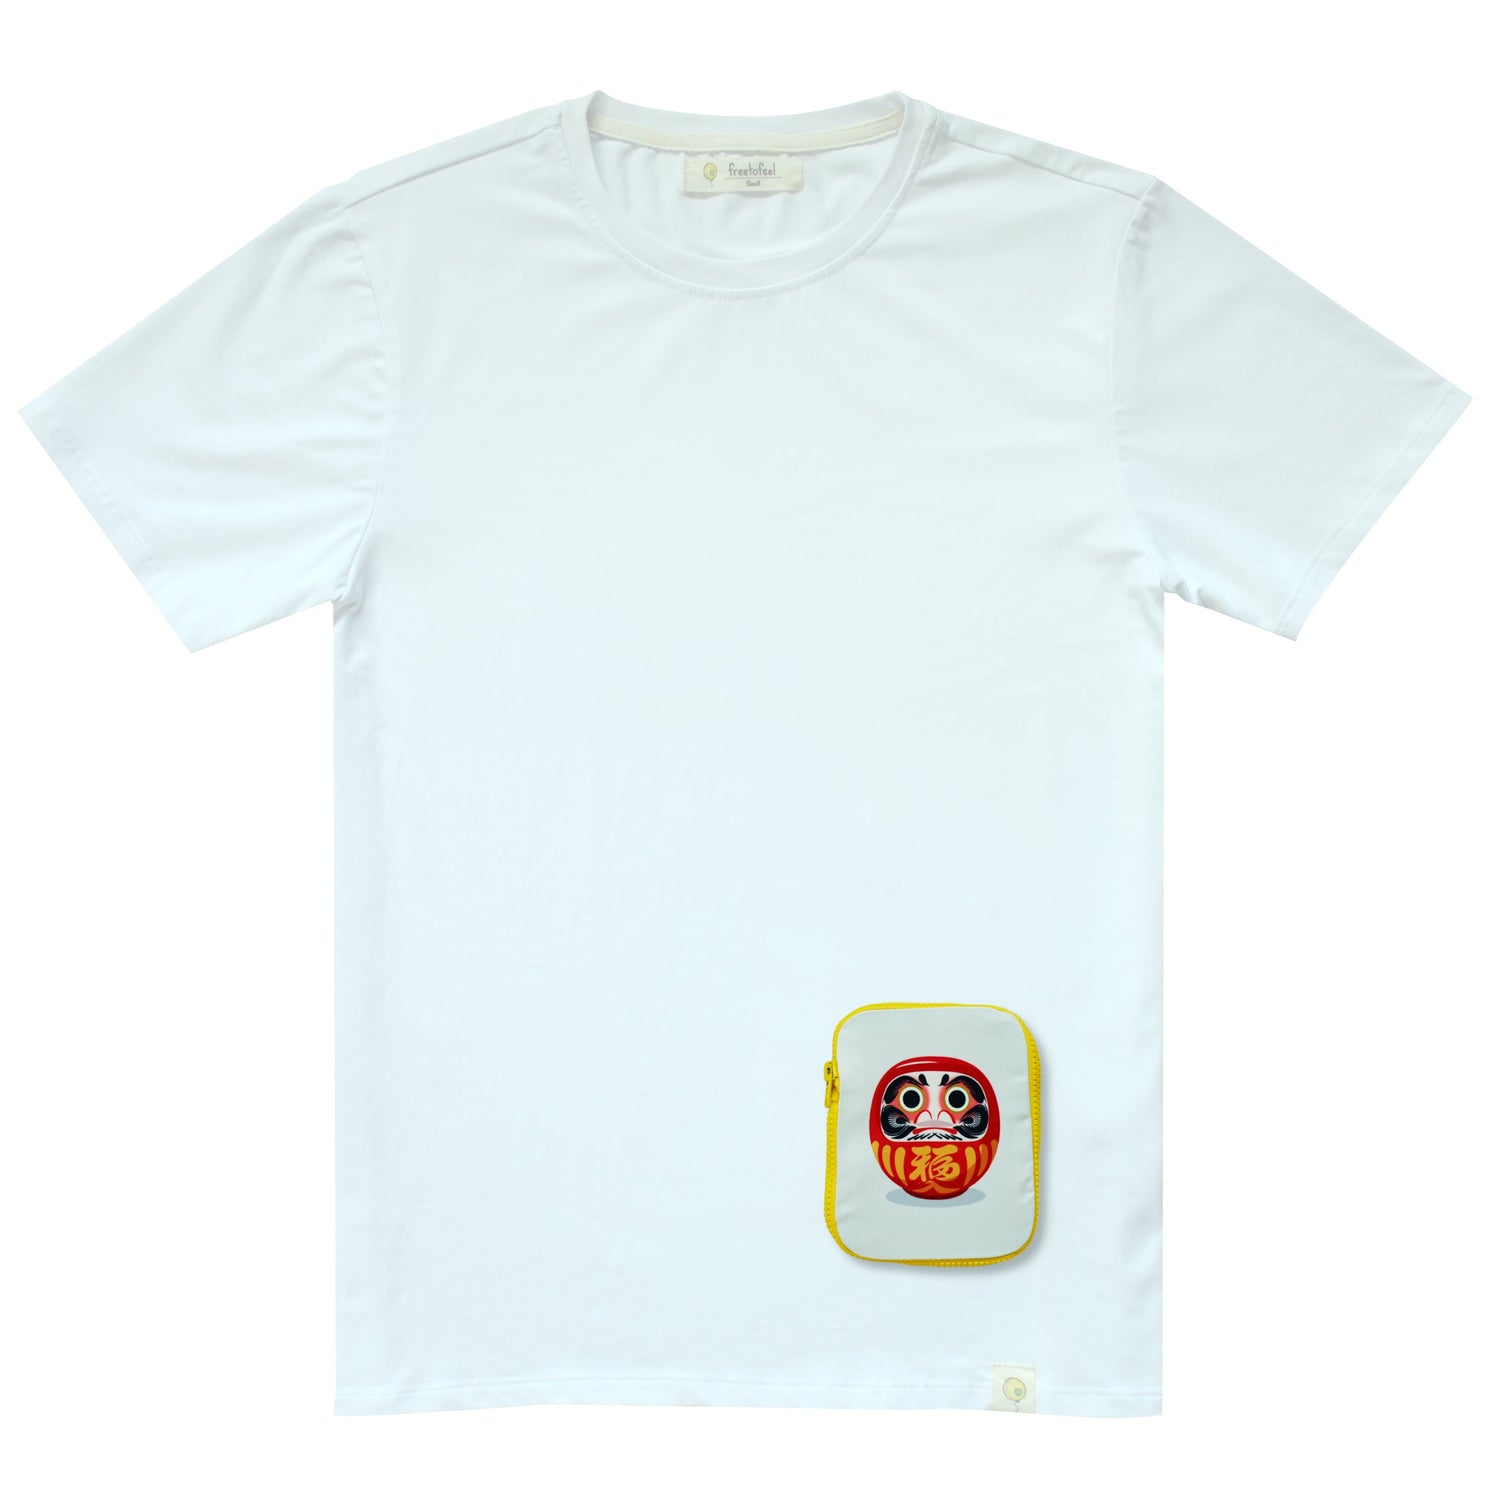 Graphic Tees with Interchangeable Pockets | Daruma PockeTee 